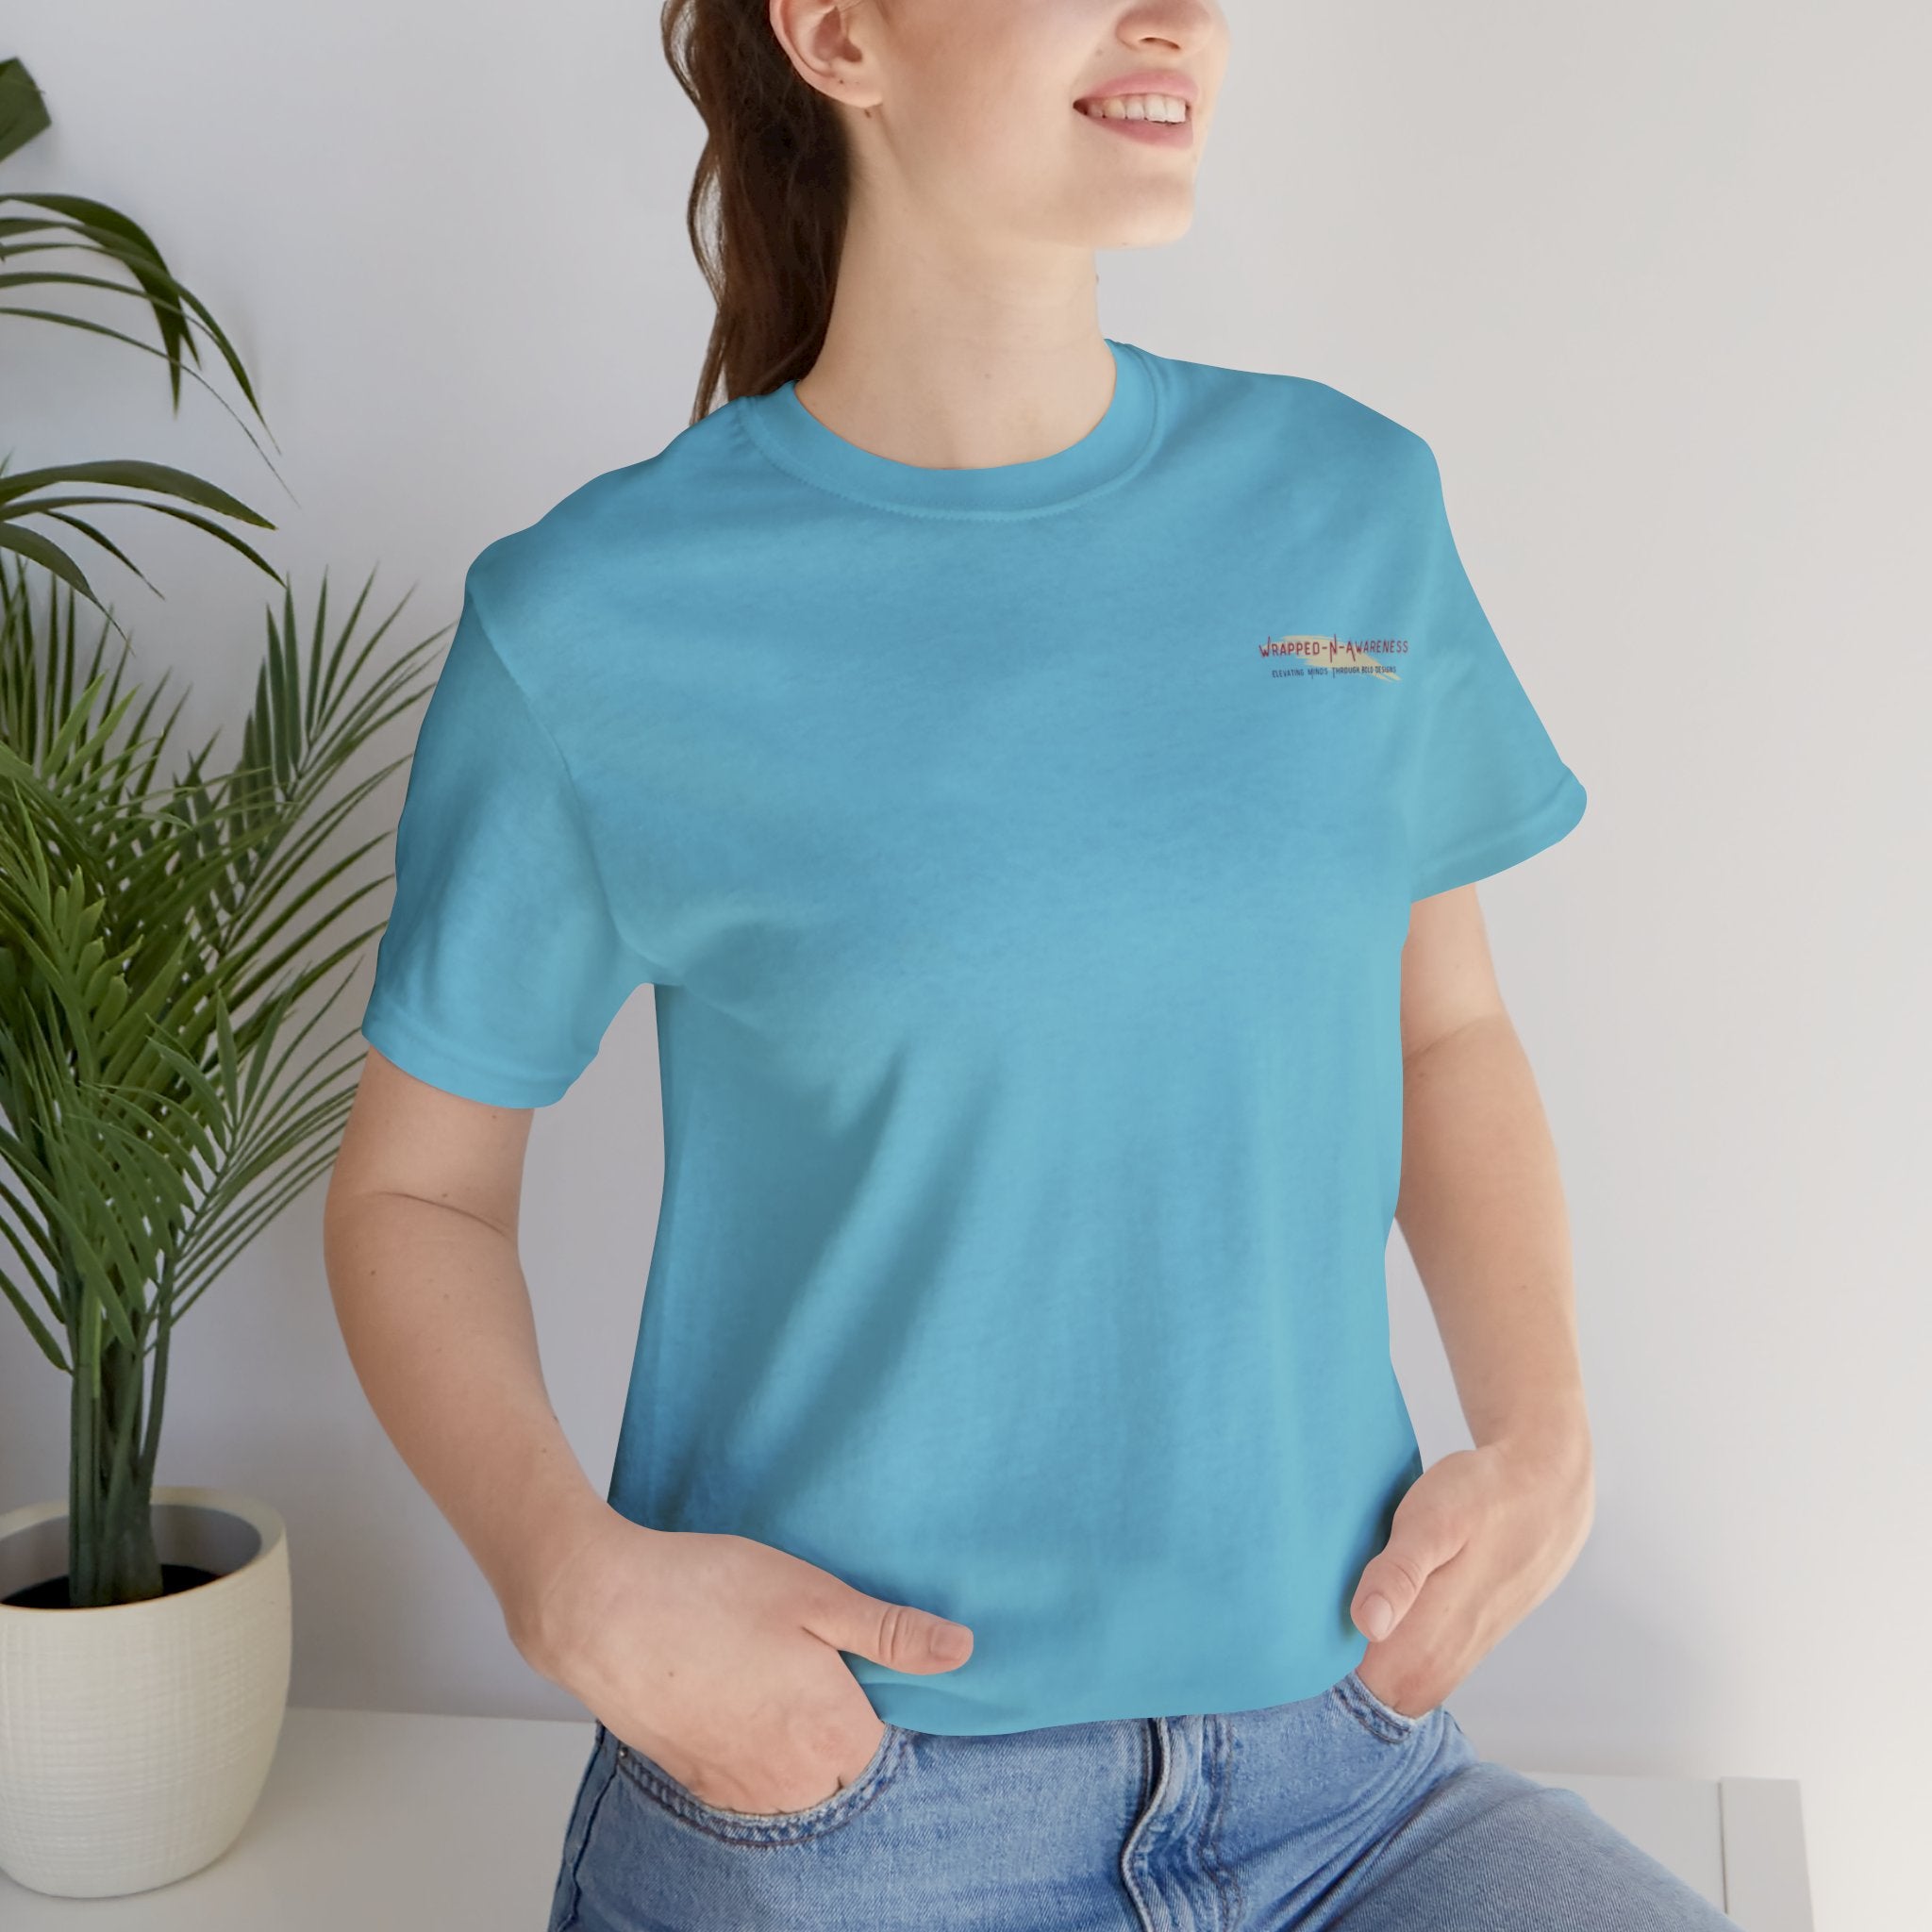 Inspire Growth Jersey Tee - Bella+Canvas 3001 Turquoise Airlume Cotton Bella+Canvas 3001 Crew Neckline Jersey Short Sleeve Lightweight Fabric Mental Health Support Retail Fit Tear-away Label Tee Unisex Tee T-Shirt 8097560171367338175_2048 Printify